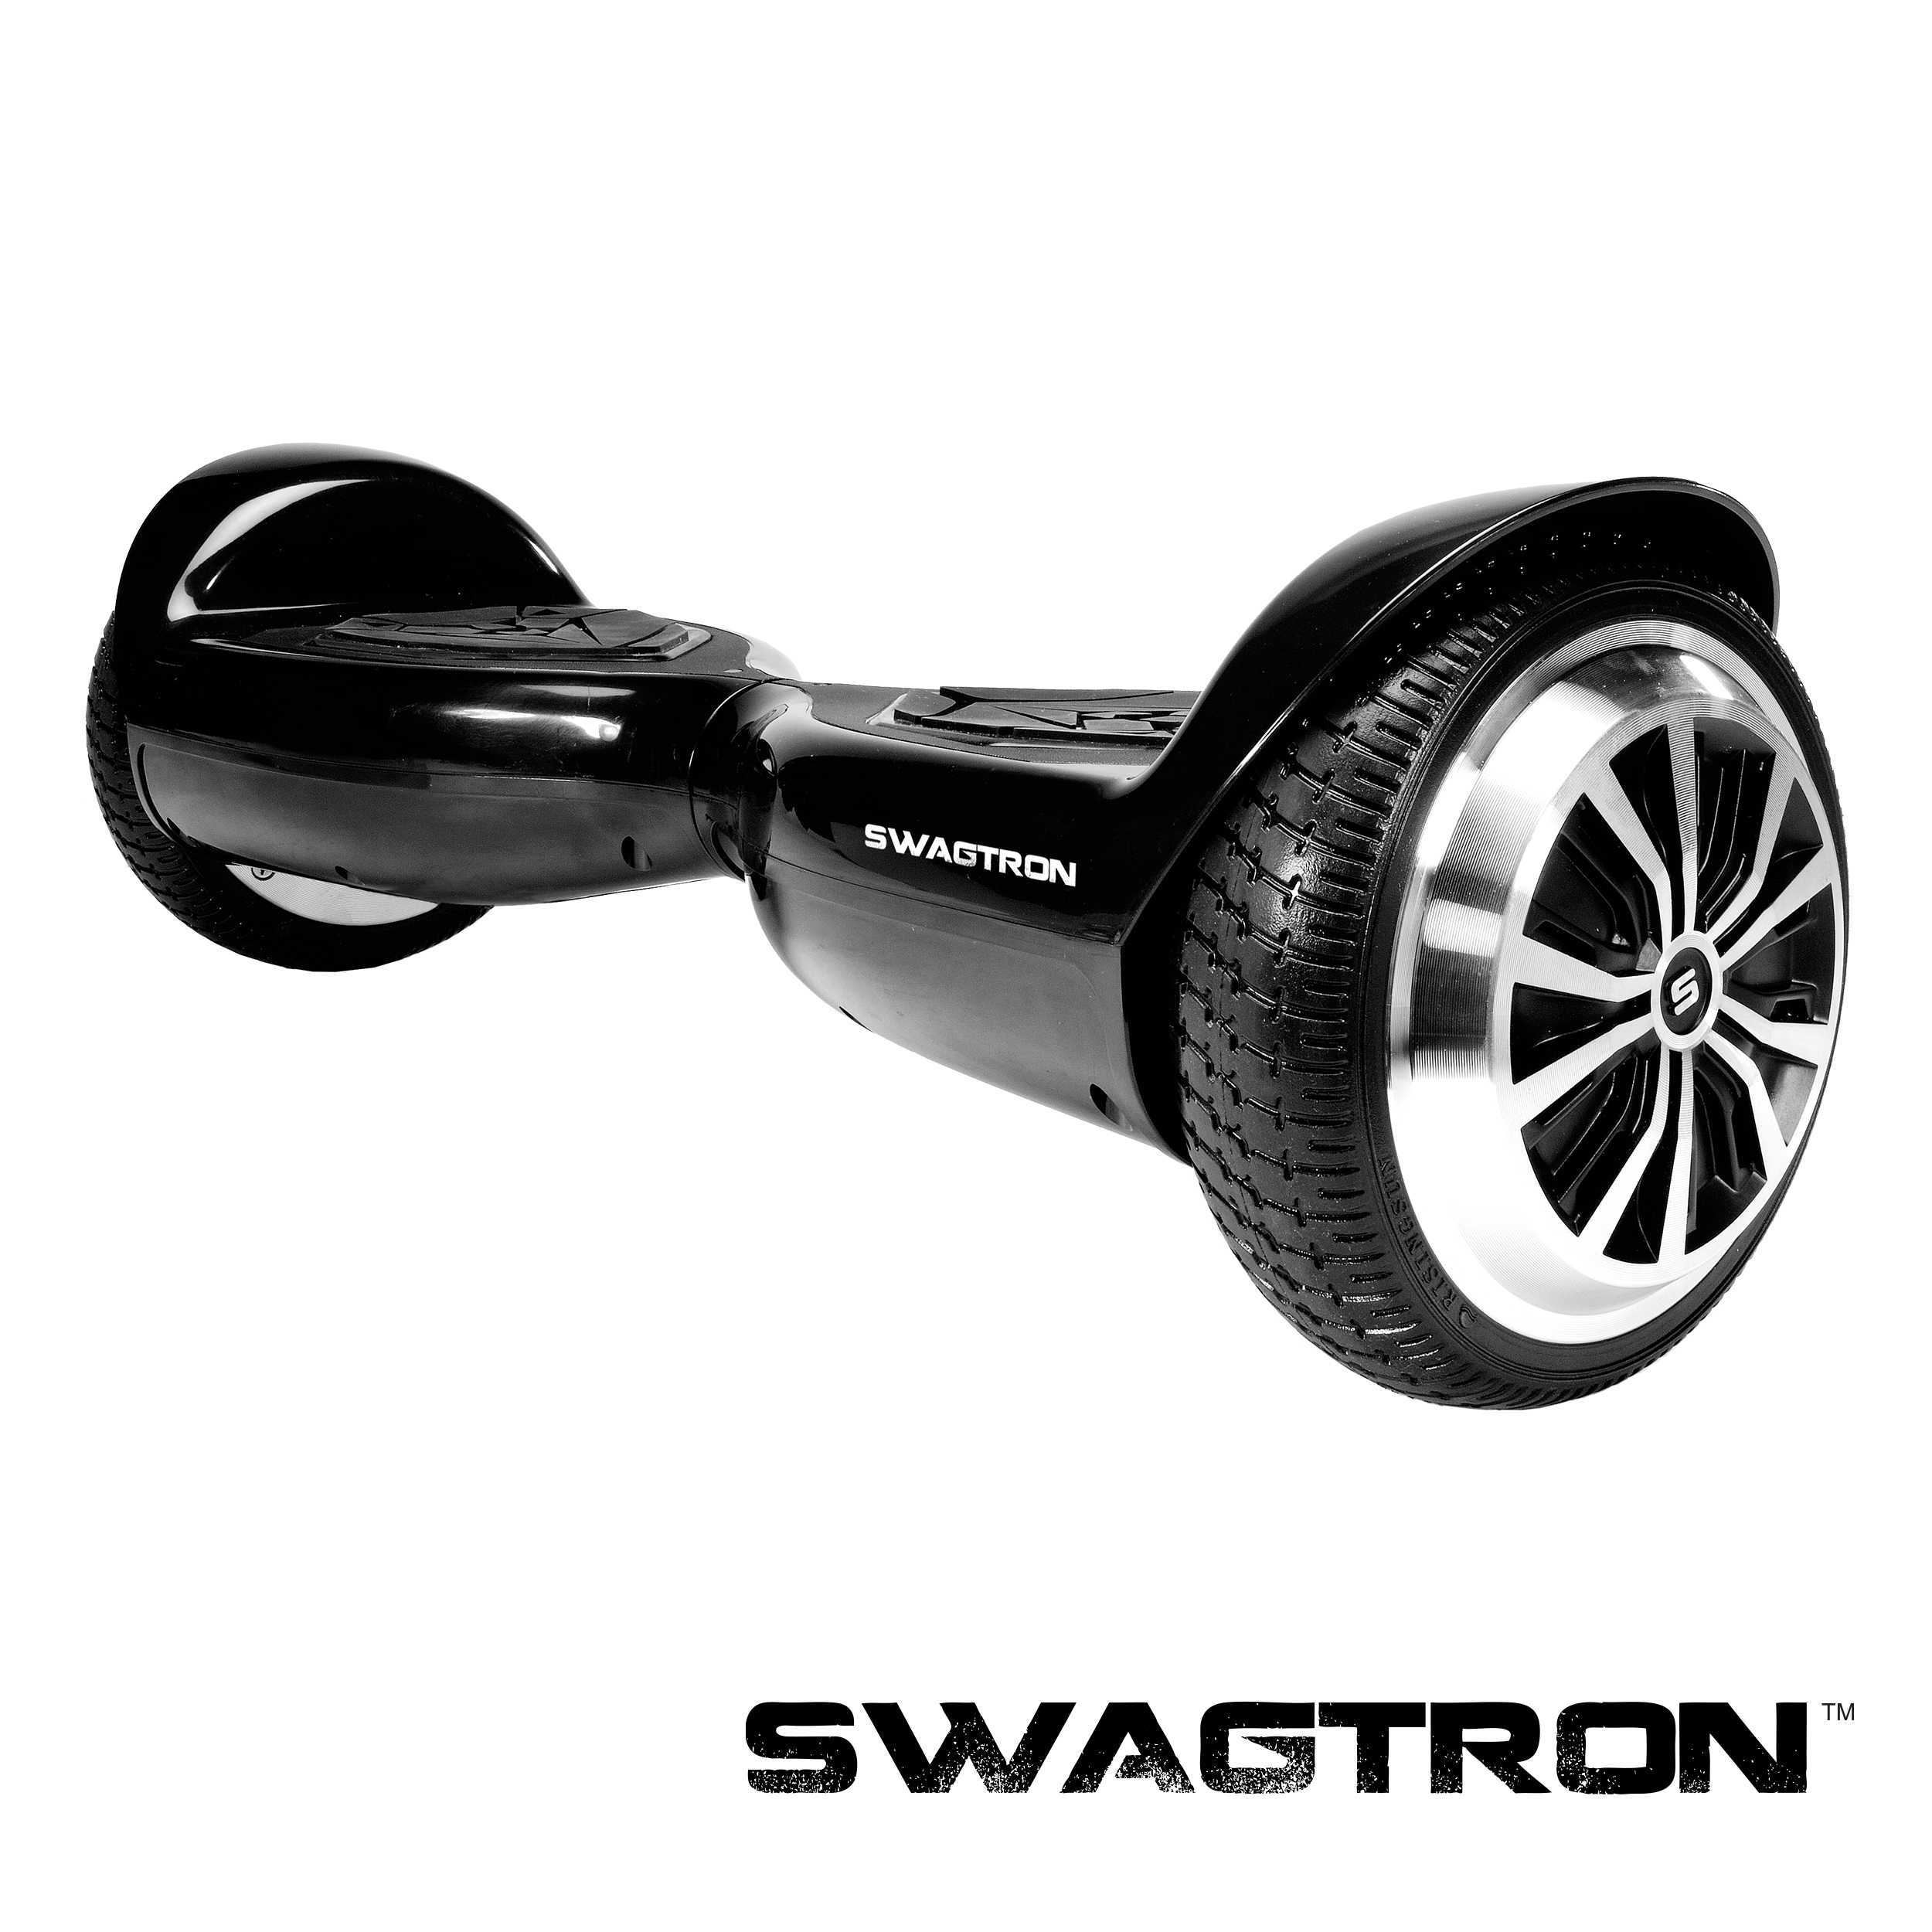 swagtron_t5_black_front_perspective